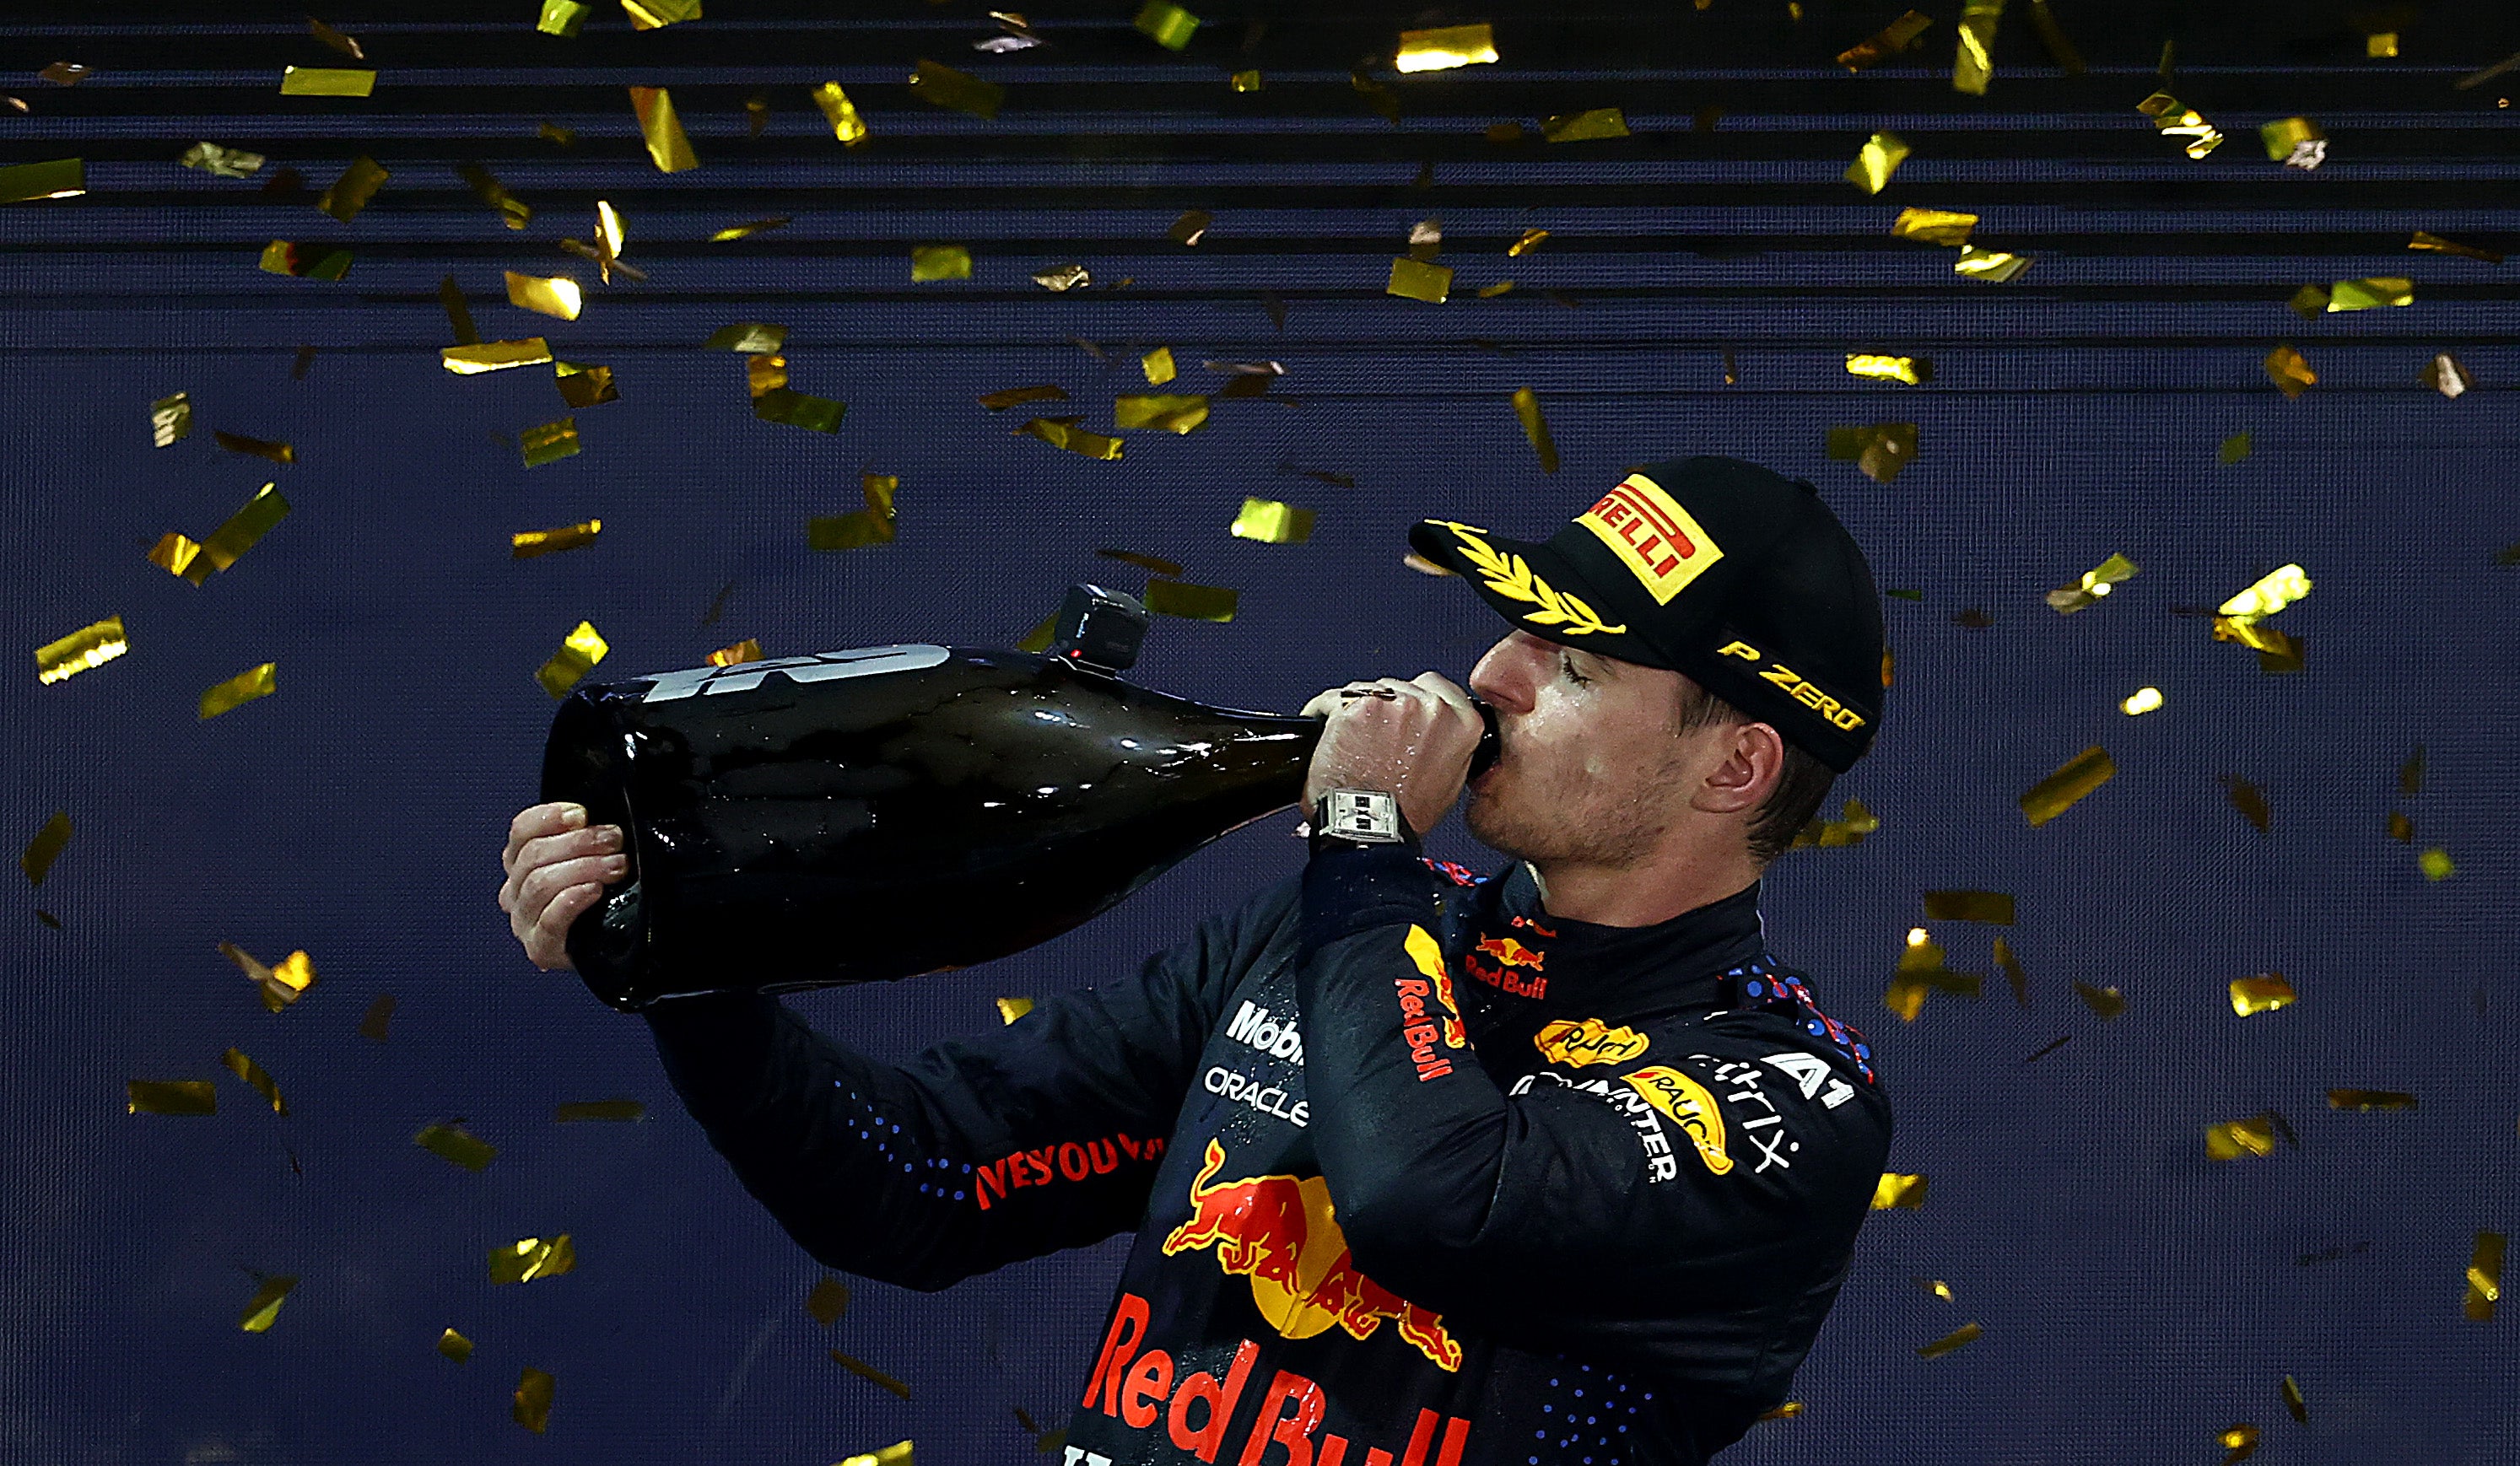 Verstappen takes his first world championship after leading for most of the season